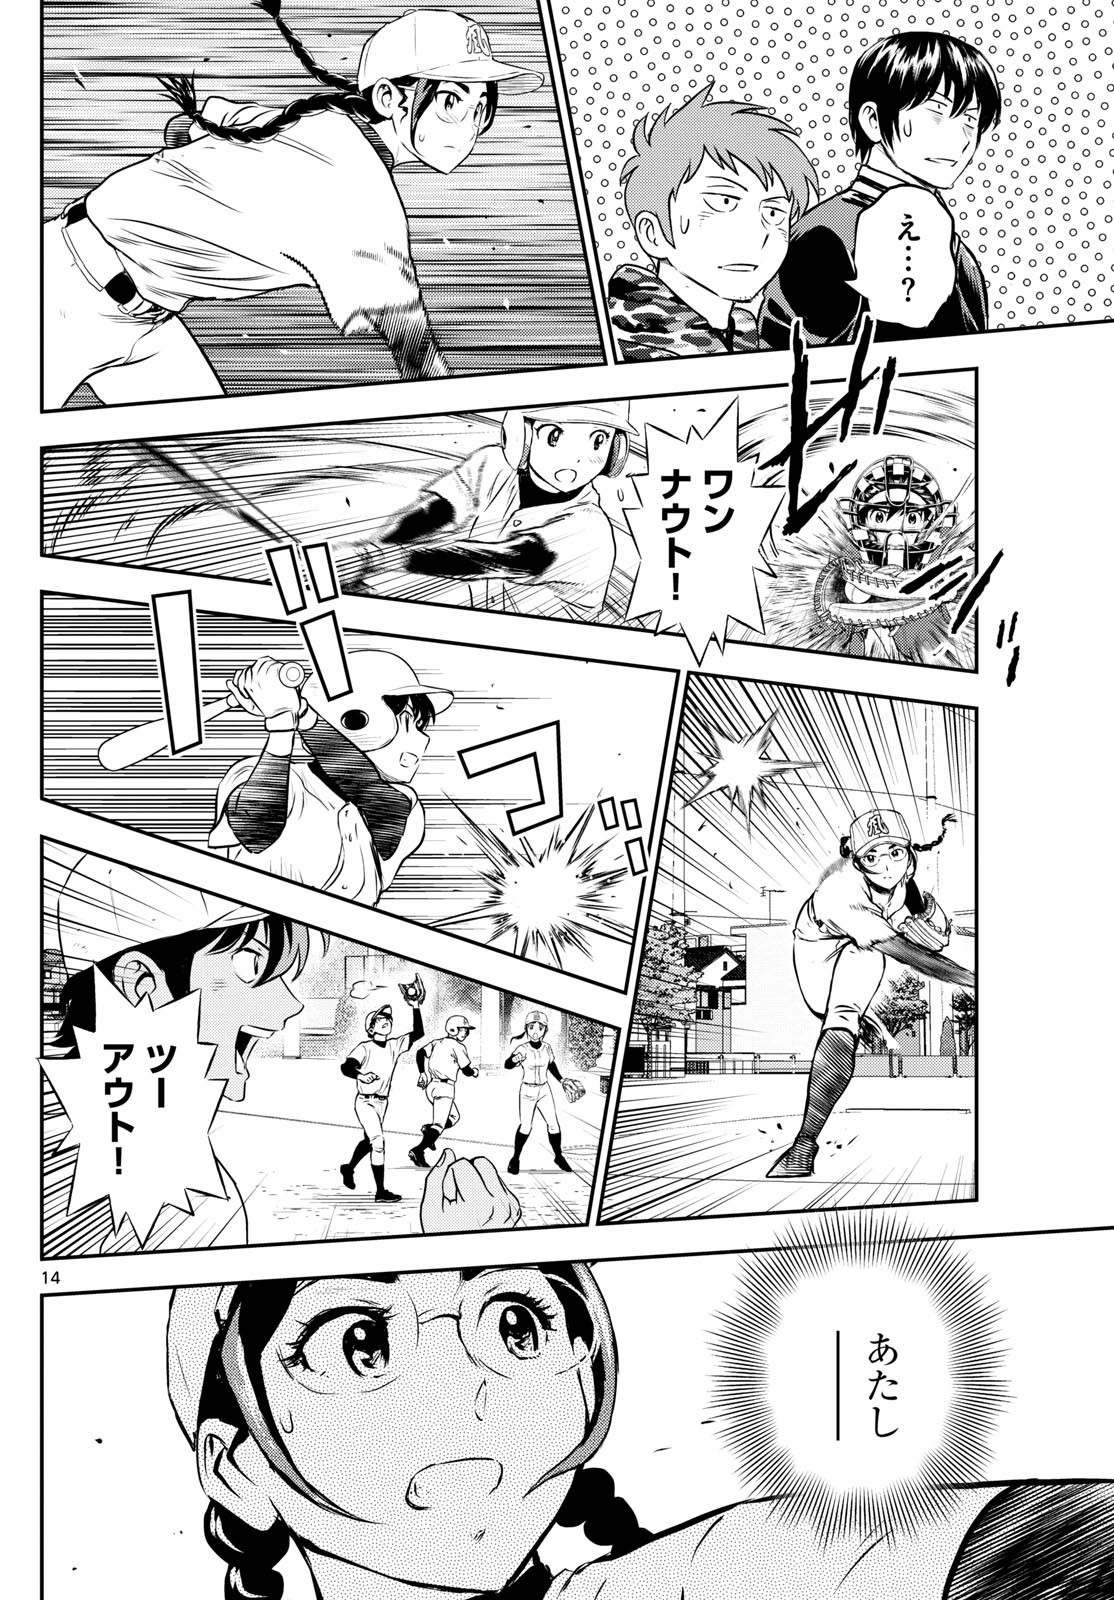 Major 2nd - メジャーセカンド - Chapter 282 - Page 14